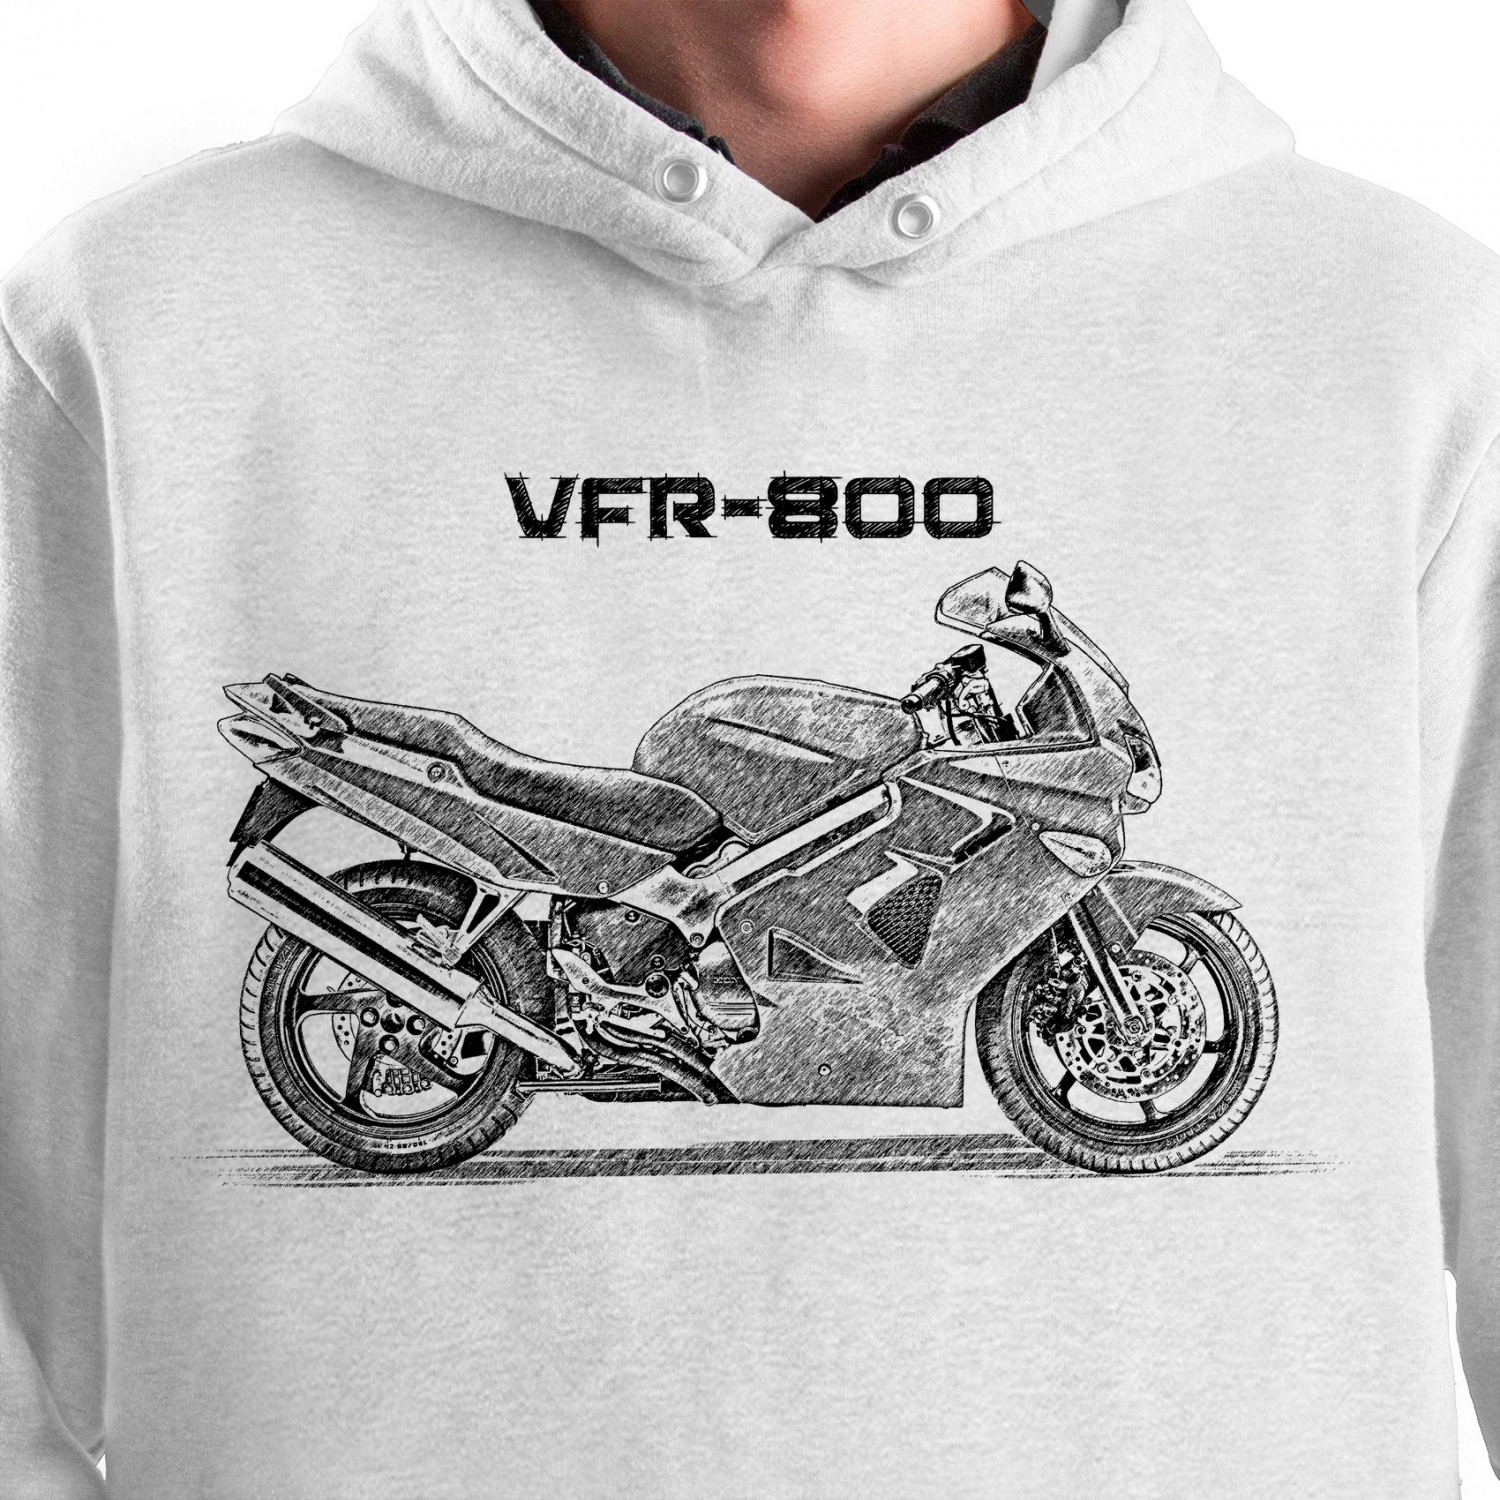 White T-shirt with Honda VFR-800. Gift for motorcyclist.